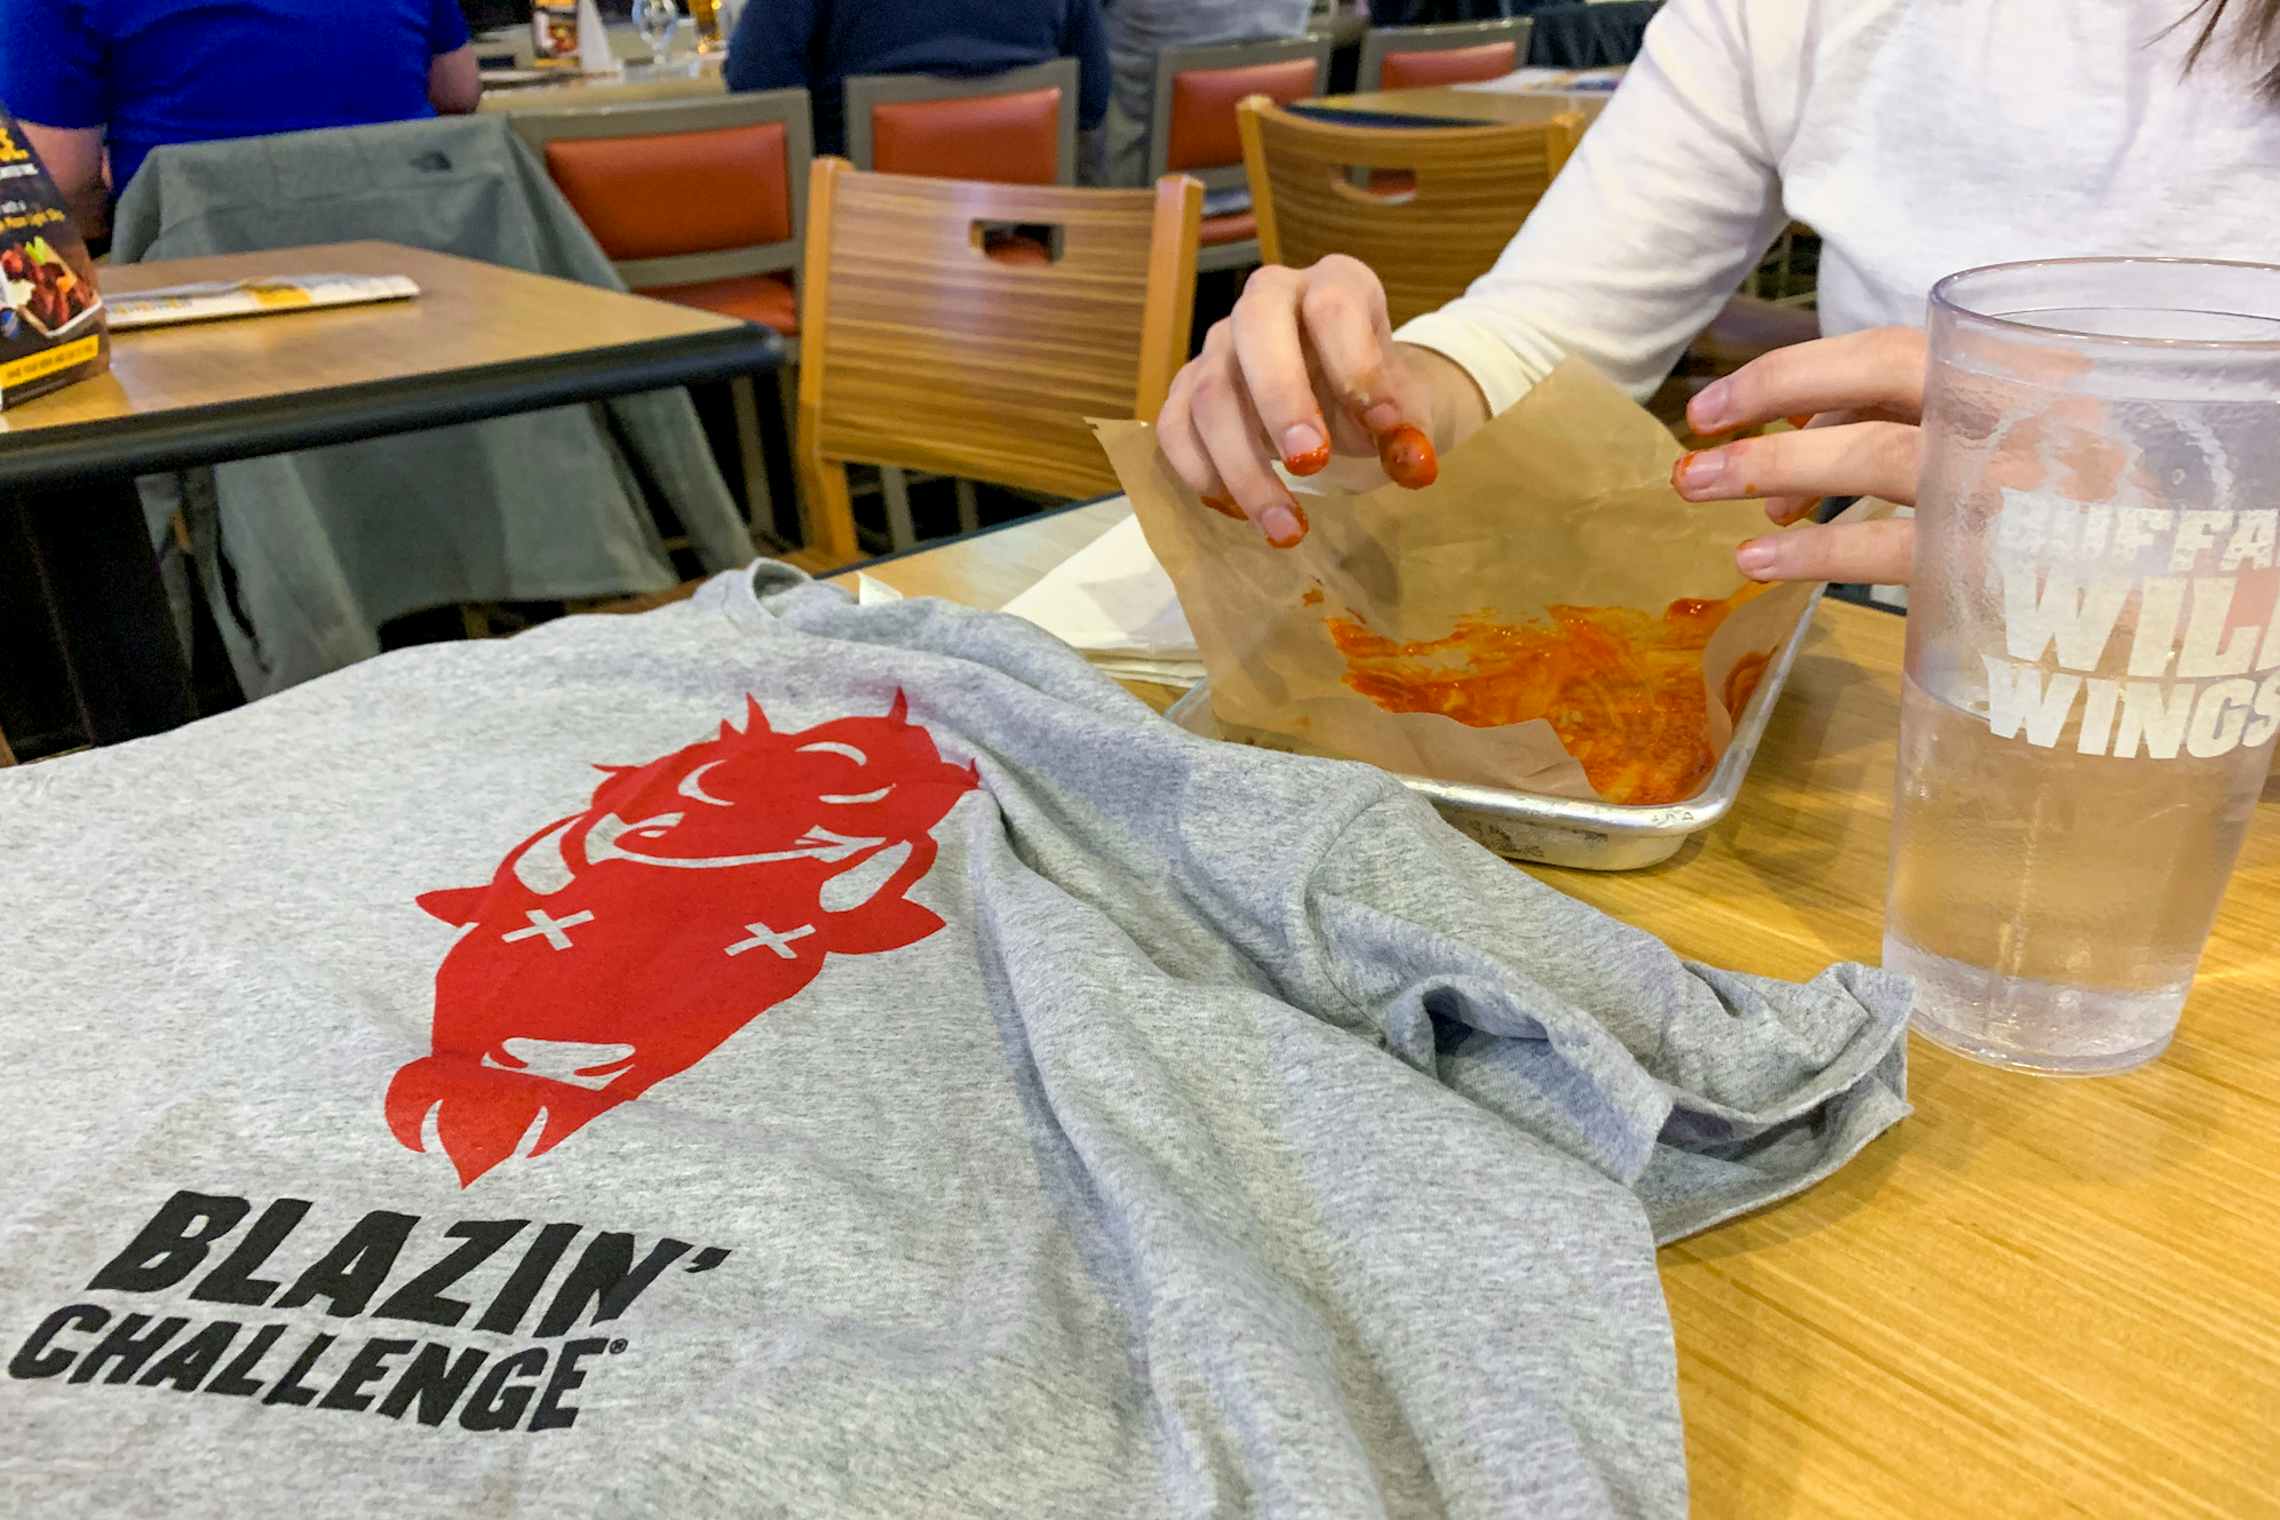 A woman sitting in a Buffalo Wild Wings restaurant with her fingers covered in buffalo sauce over an empty platter. There is a cup of water on the table next to her and a t-shirt with a graphic of a buffalo with X's for eyes that says 